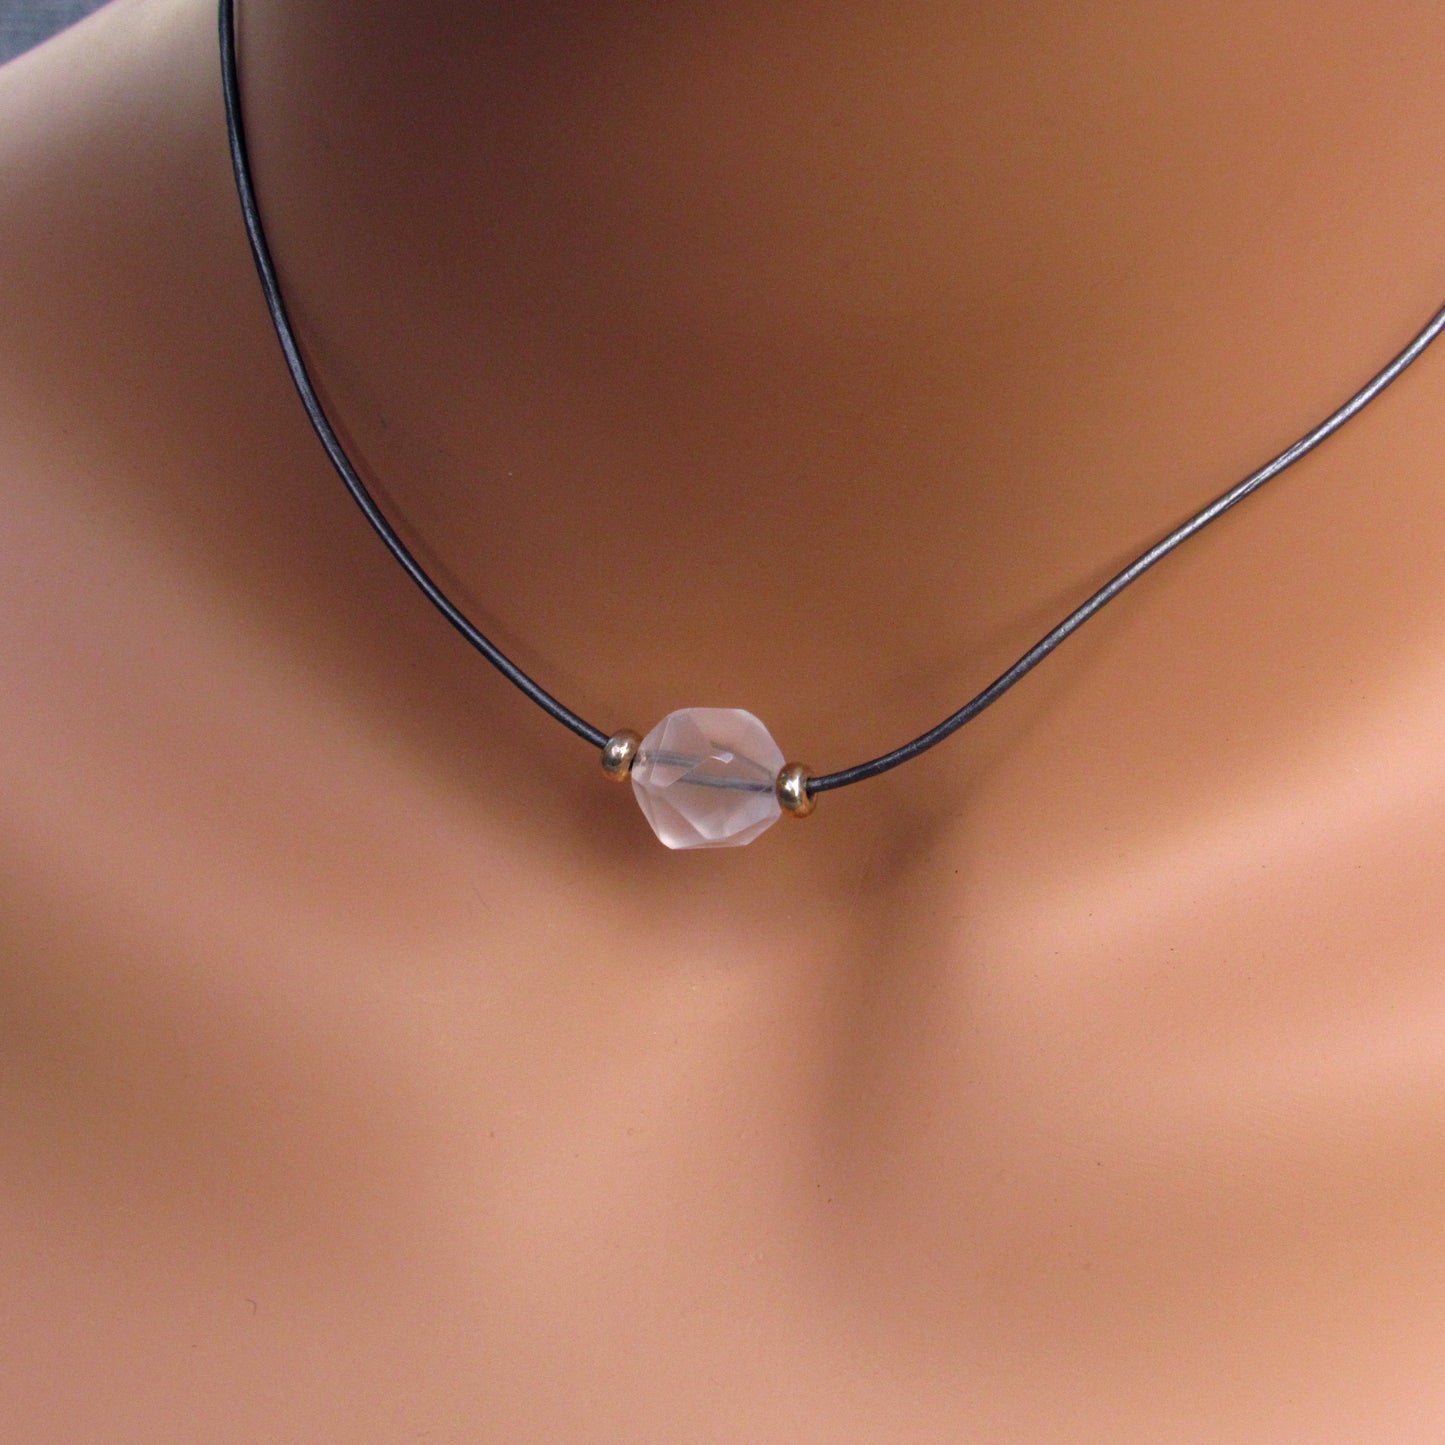 Thin Leather and Natural Topaz Gemstone necklace with Sterling Silver